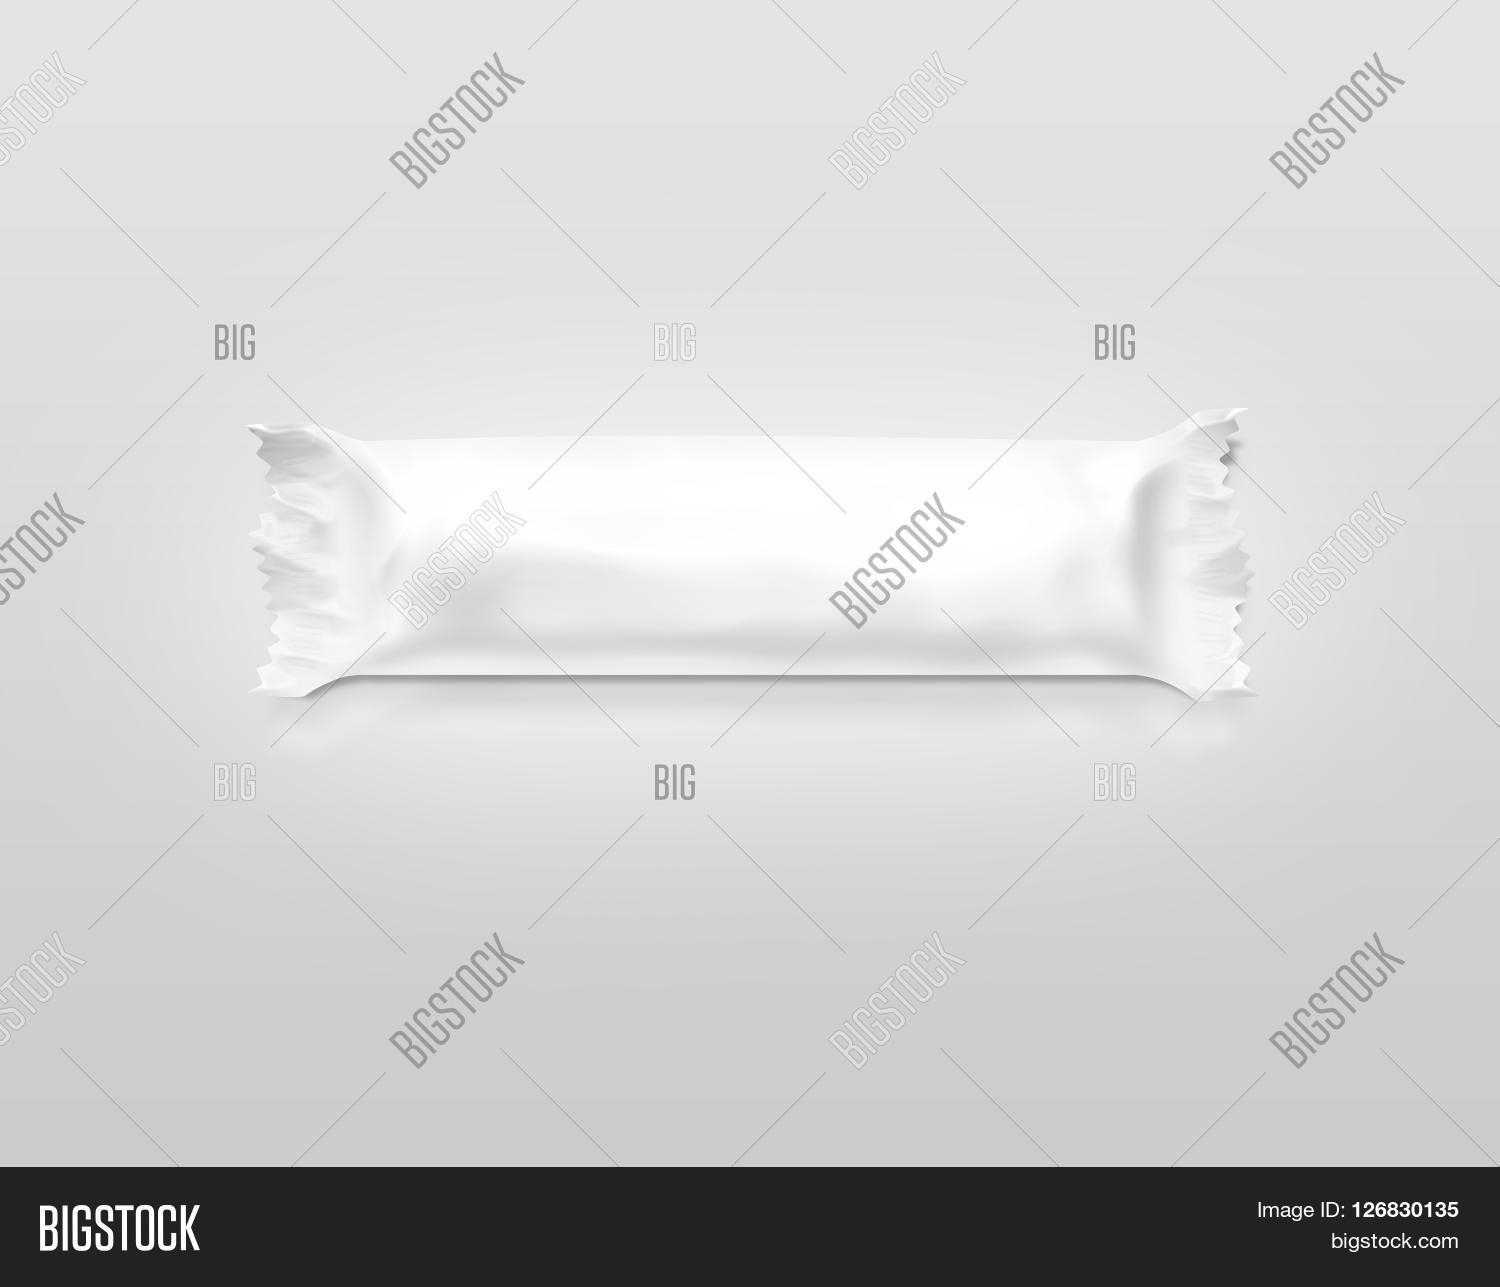 Blank White Candy Bar Image & Photo (Free Trial) | Bigstock Regarding Blank Candy Bar Wrapper Template